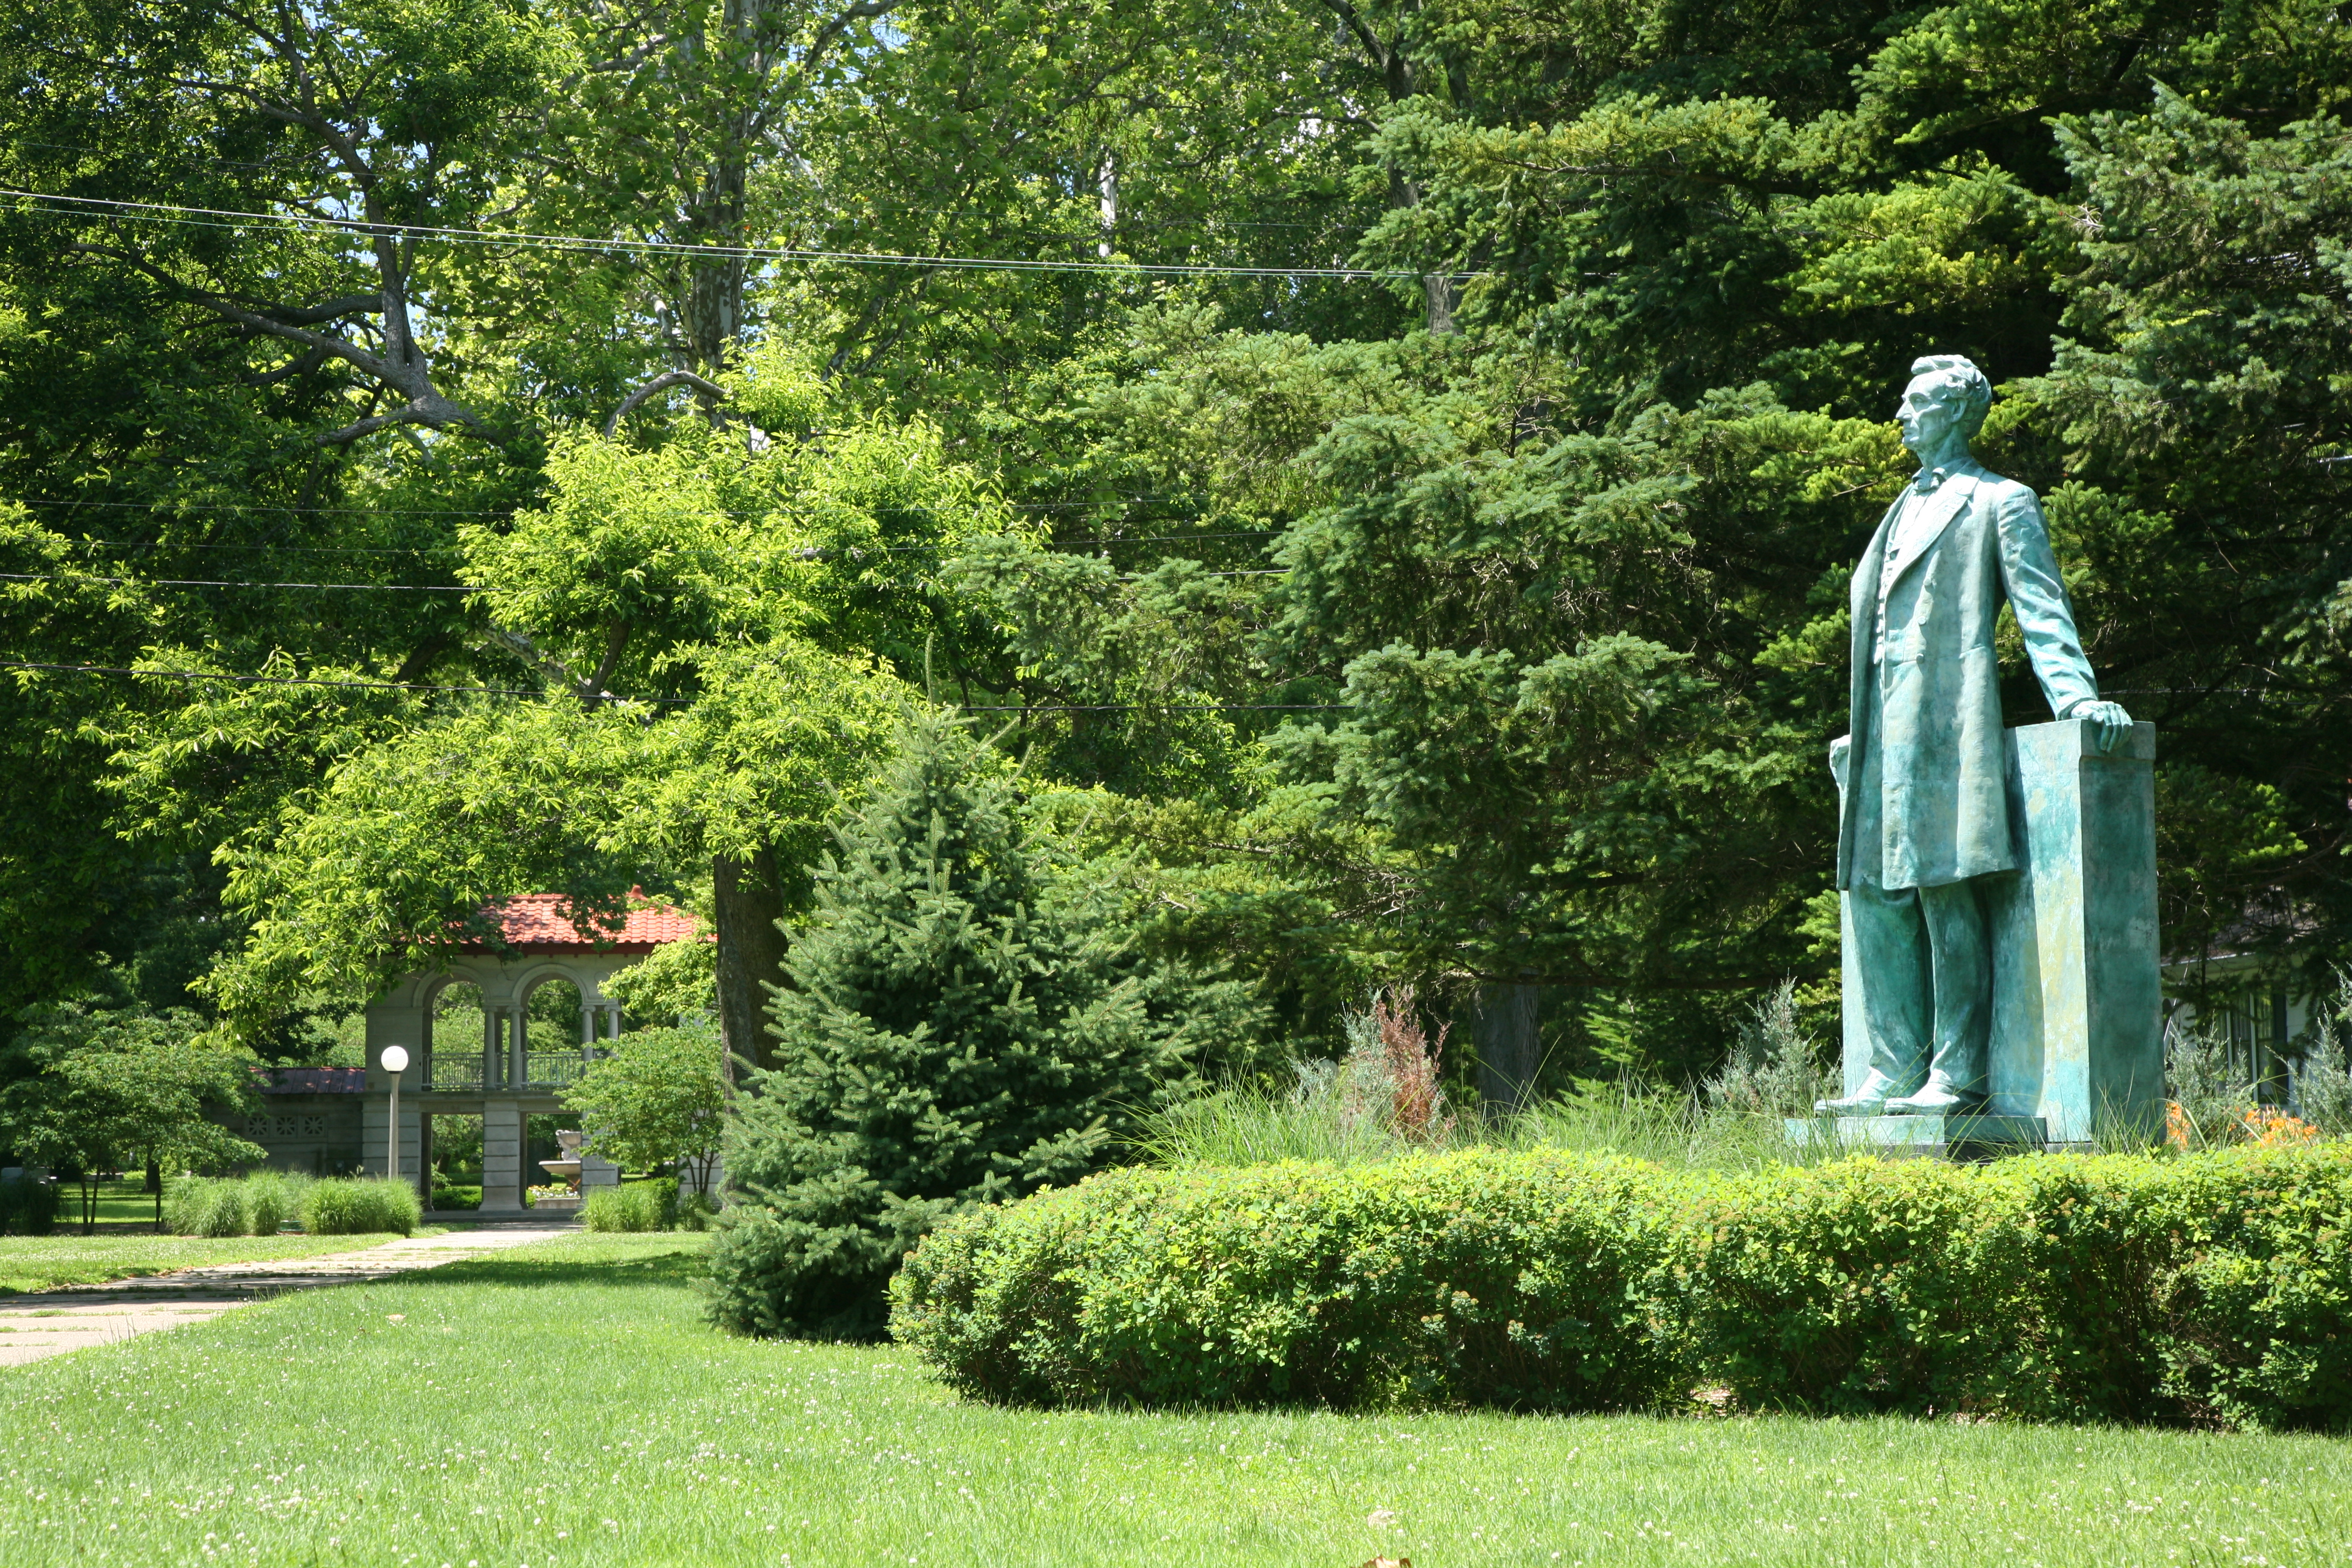 teal colored statue of Abe Lincoln surrounded by trees